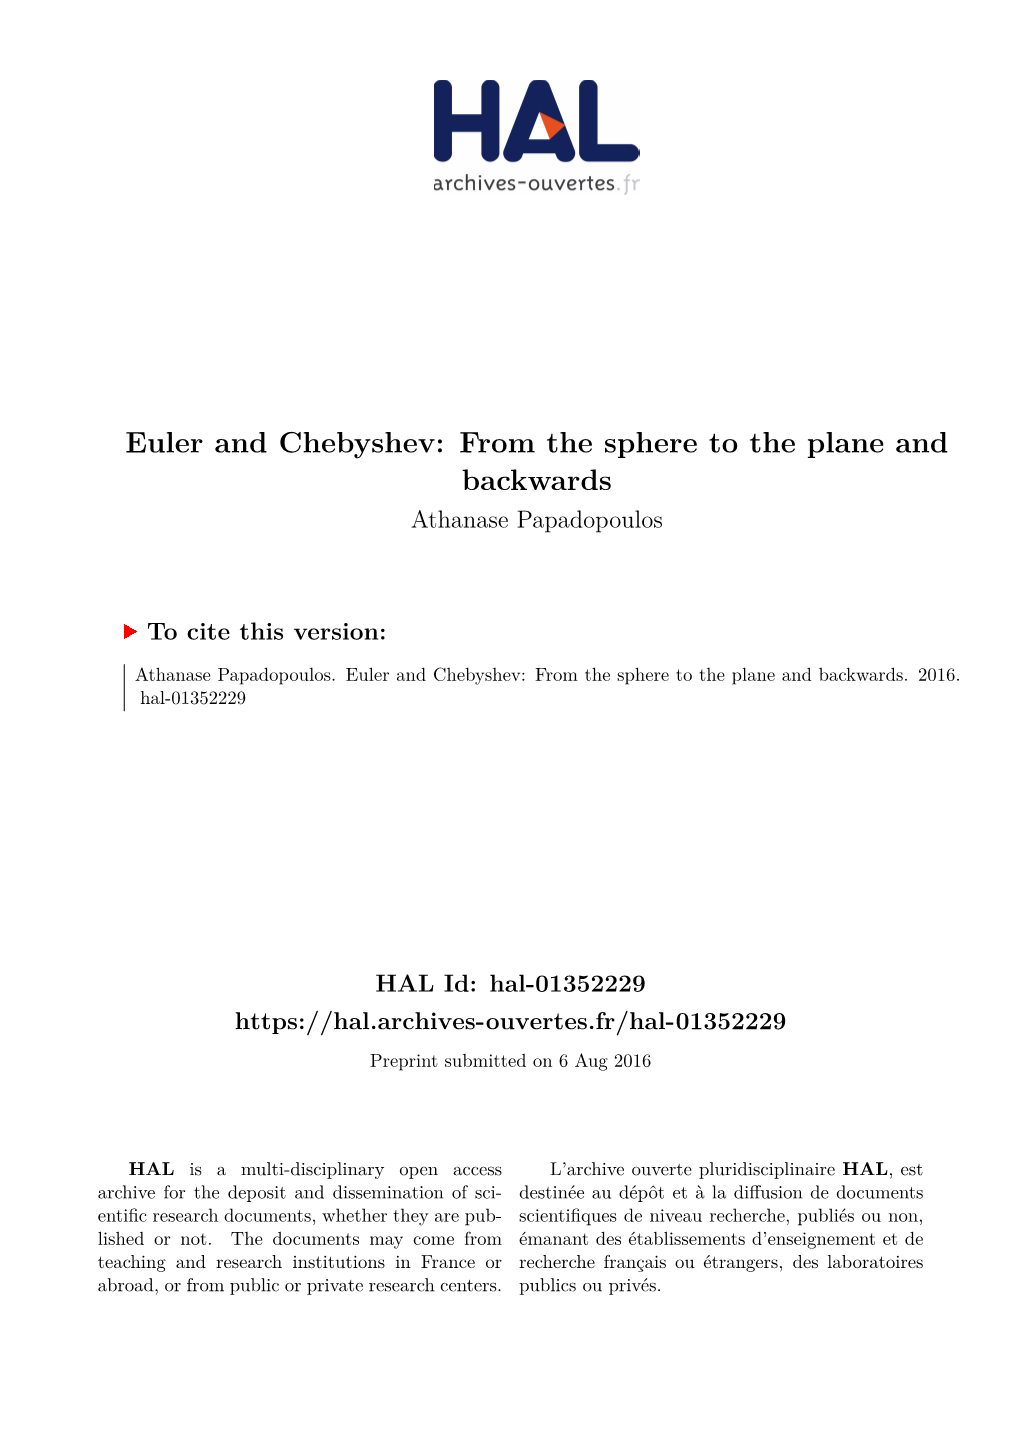 Euler and Chebyshev: from the Sphere to the Plane and Backwards Athanase Papadopoulos